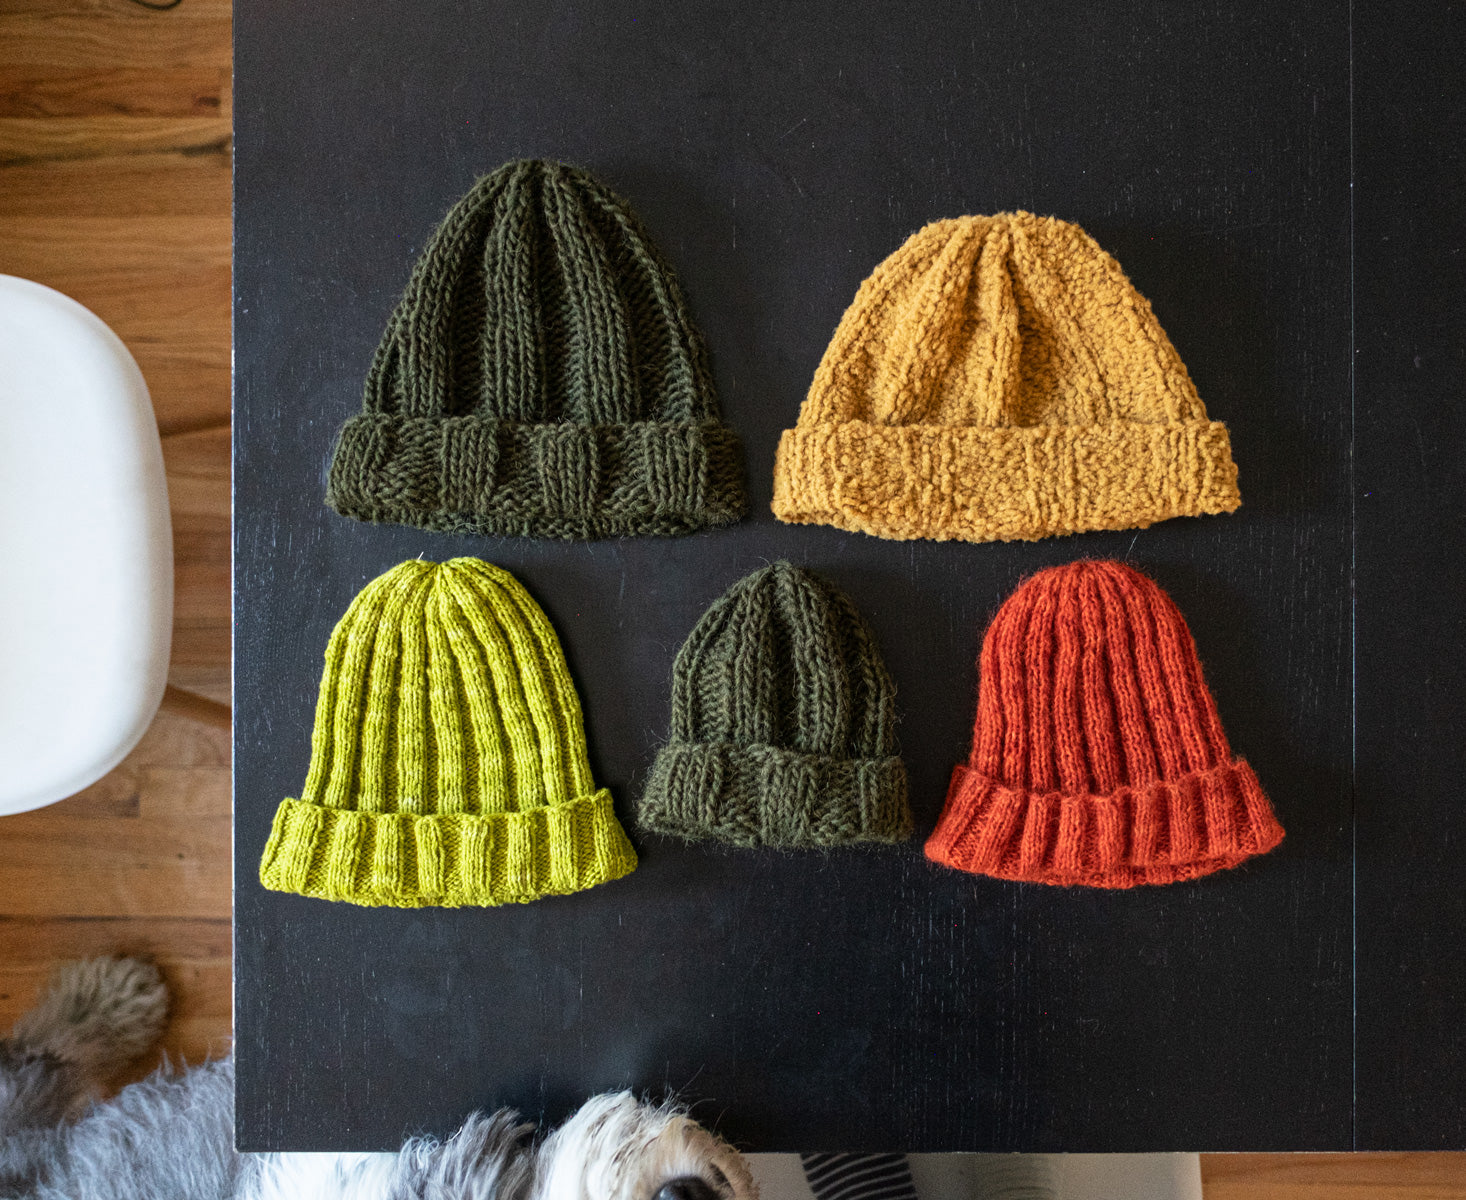 A series of rib-knit beanies with folded brims are laid out on a black table top. They are made in a variety of sizes and textures but share the same pleasingly simple construction. They seem to be laid out like eager pupils before a teacher as the nose of a sheepdog appears to lean in to inspect them.